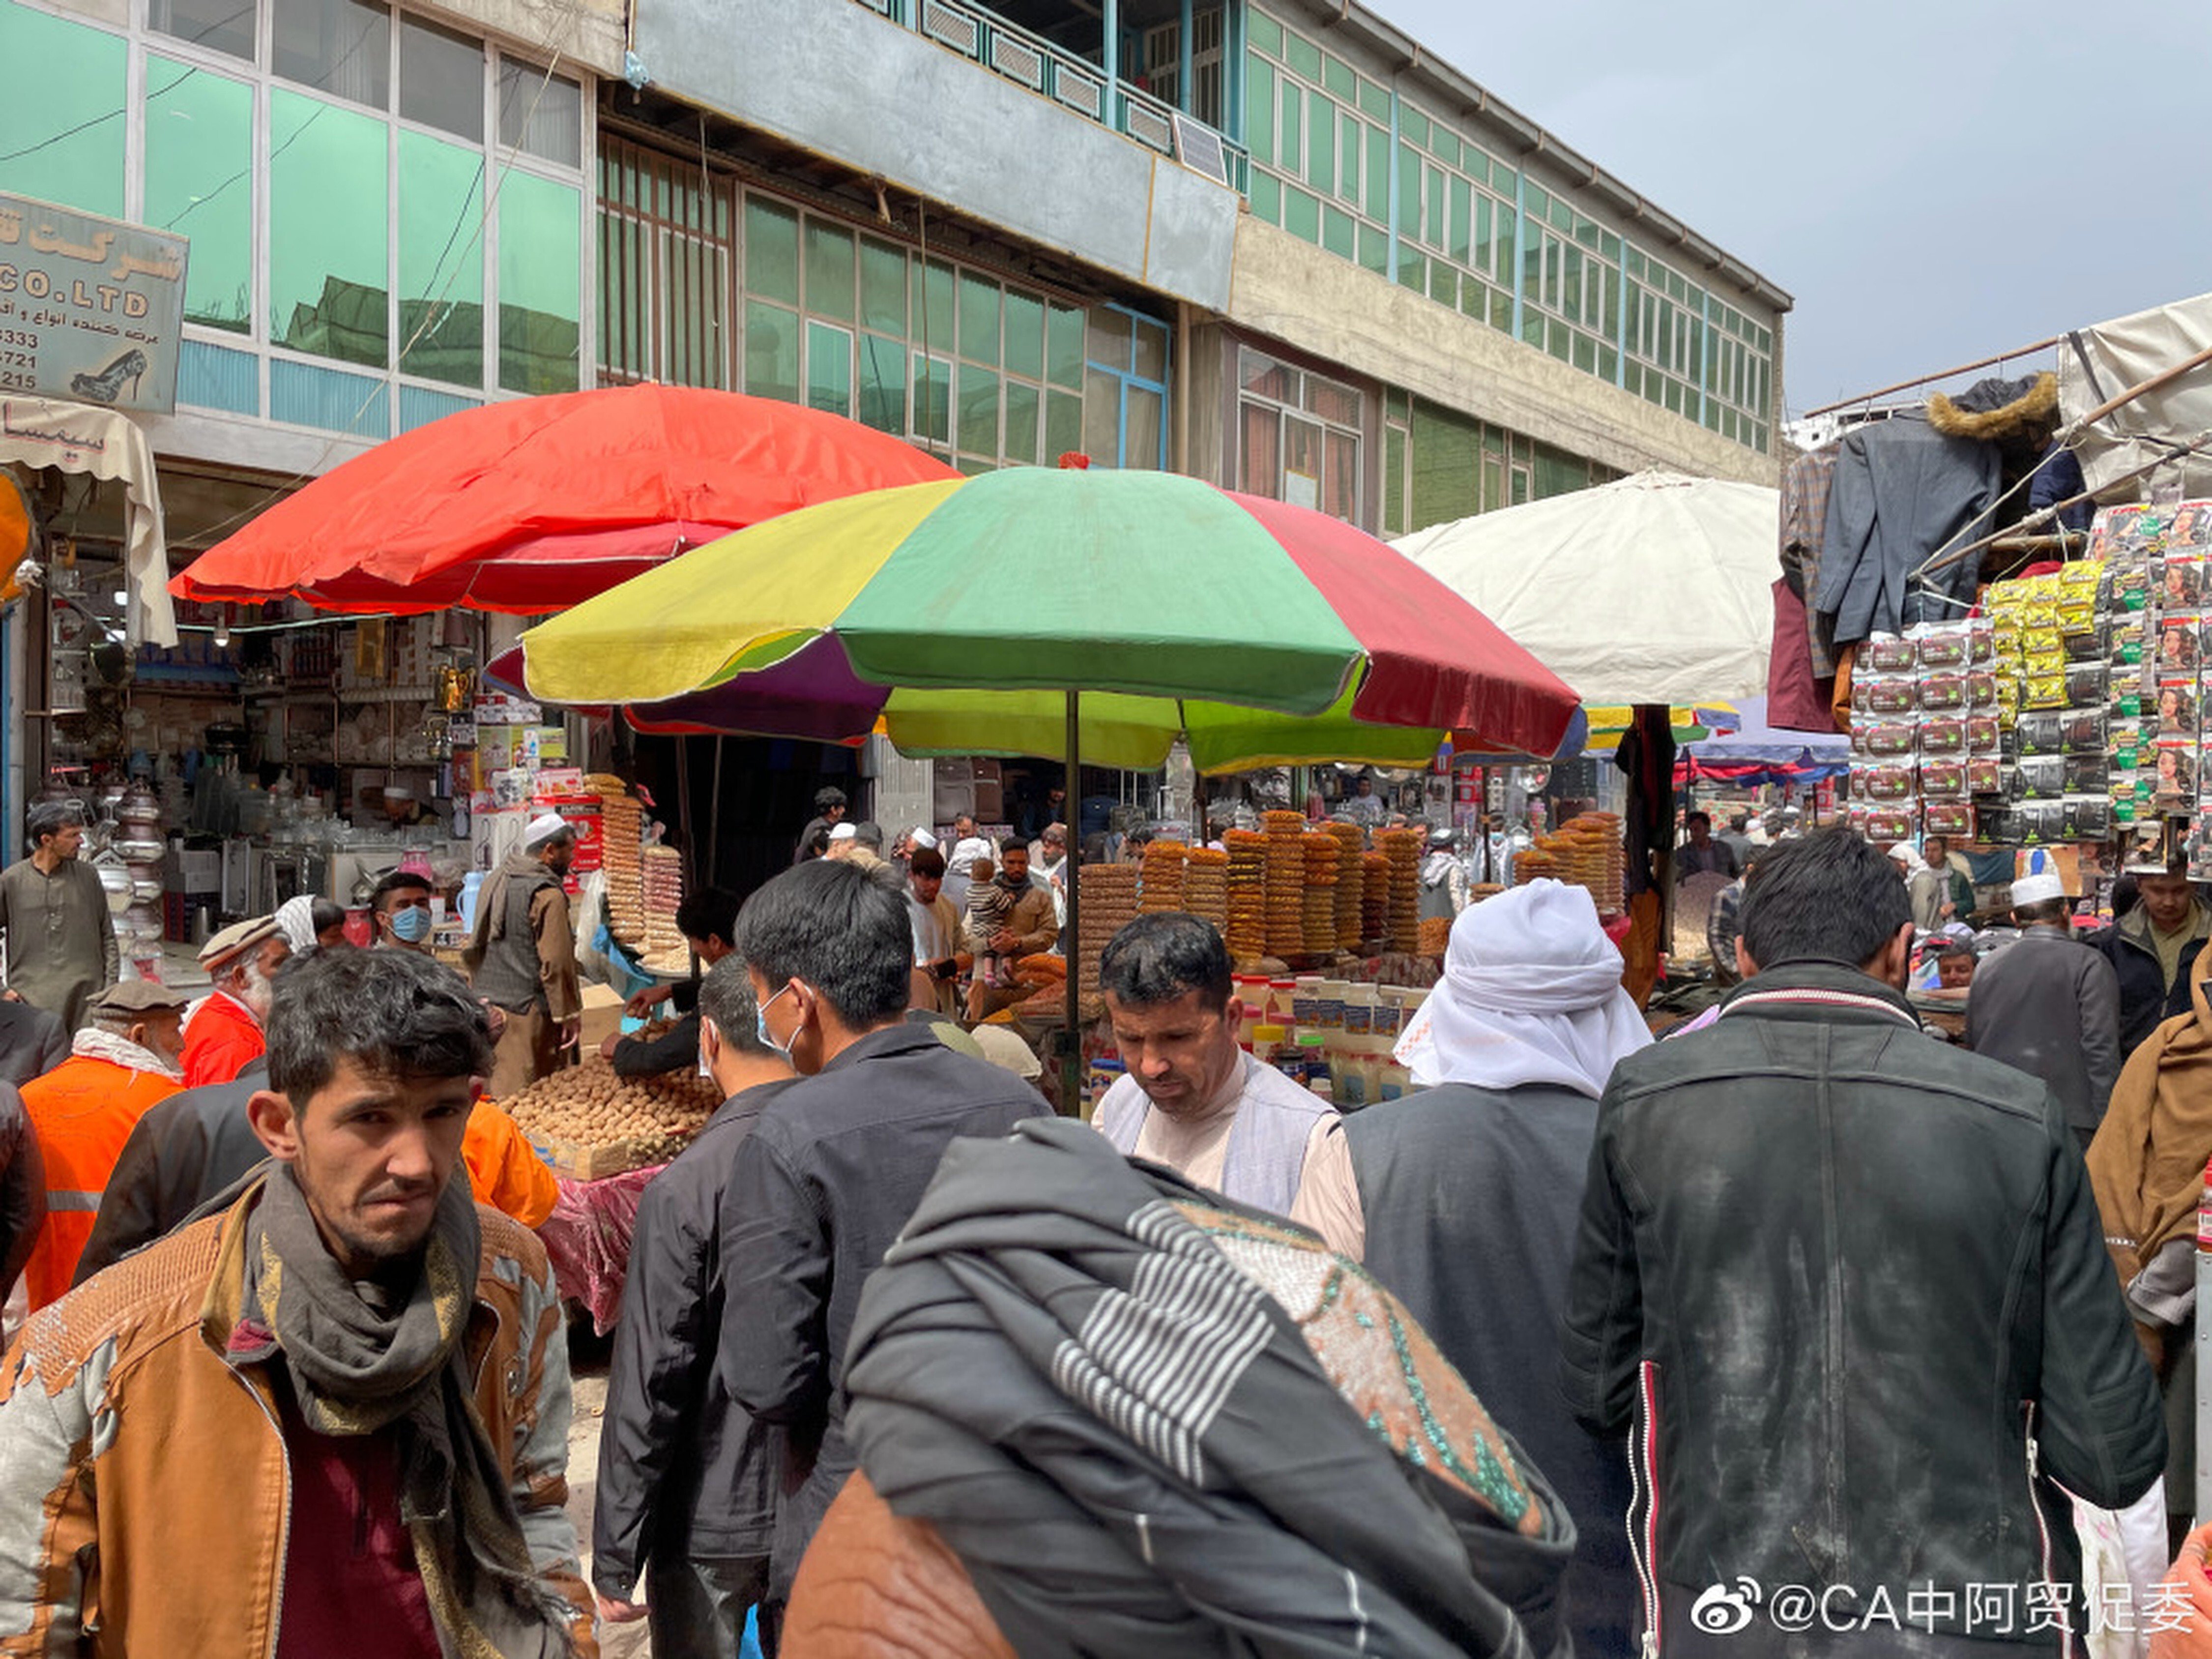 The rules of the game have changed for businesspeople in Afghanistan, says one Chinese trader. Photo: Weibo